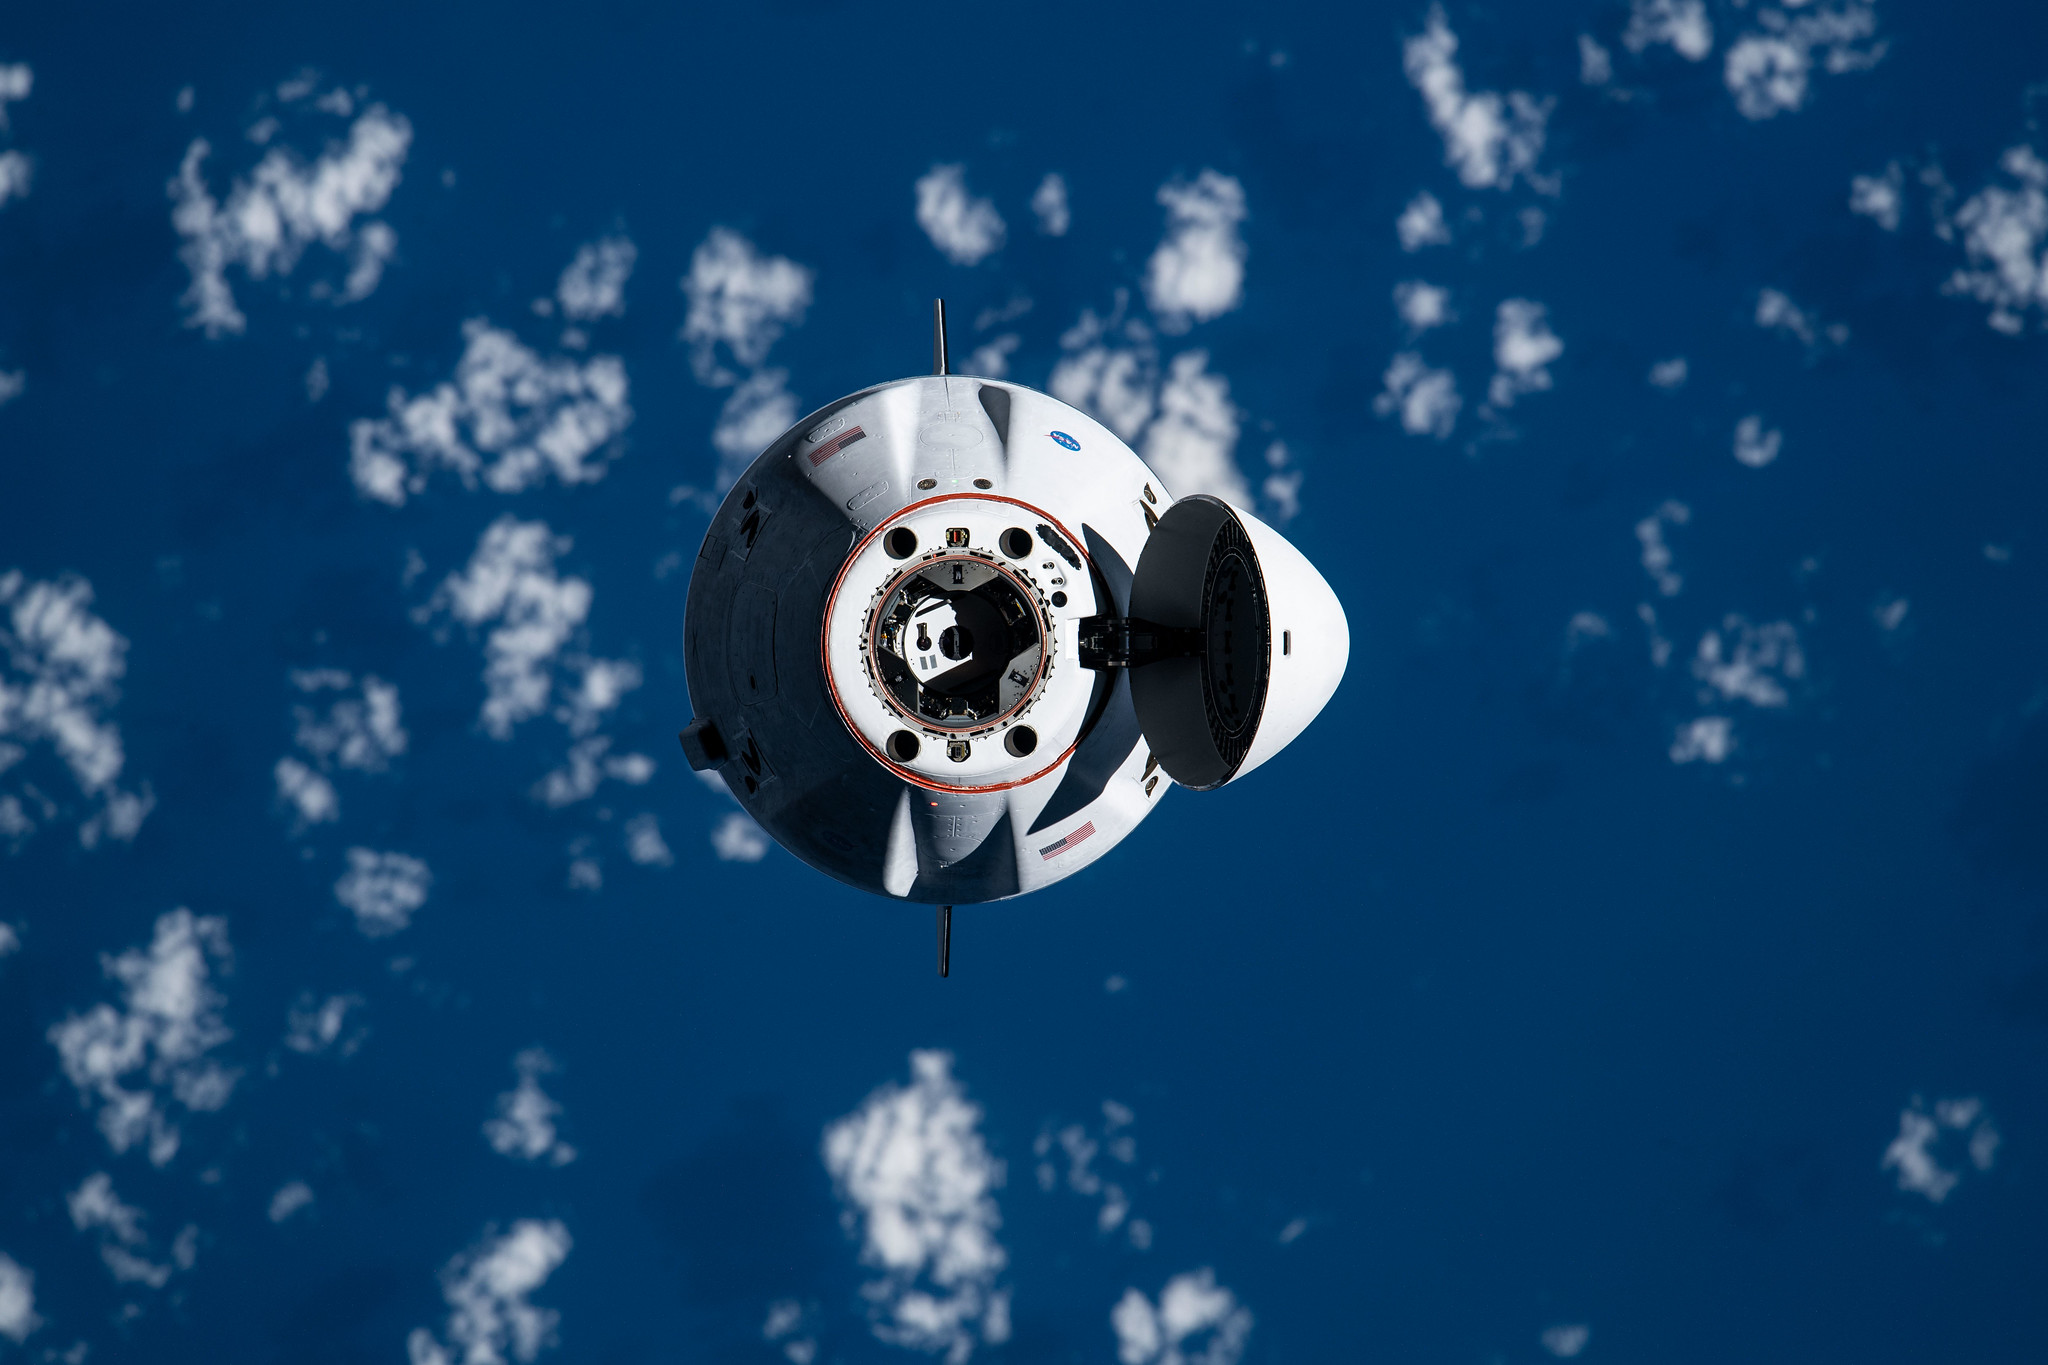 The SpaceX Cargo Dragon vehicle approaches the International Space Station for an autonomous docking to the Harmony module's forward international docking adapter.